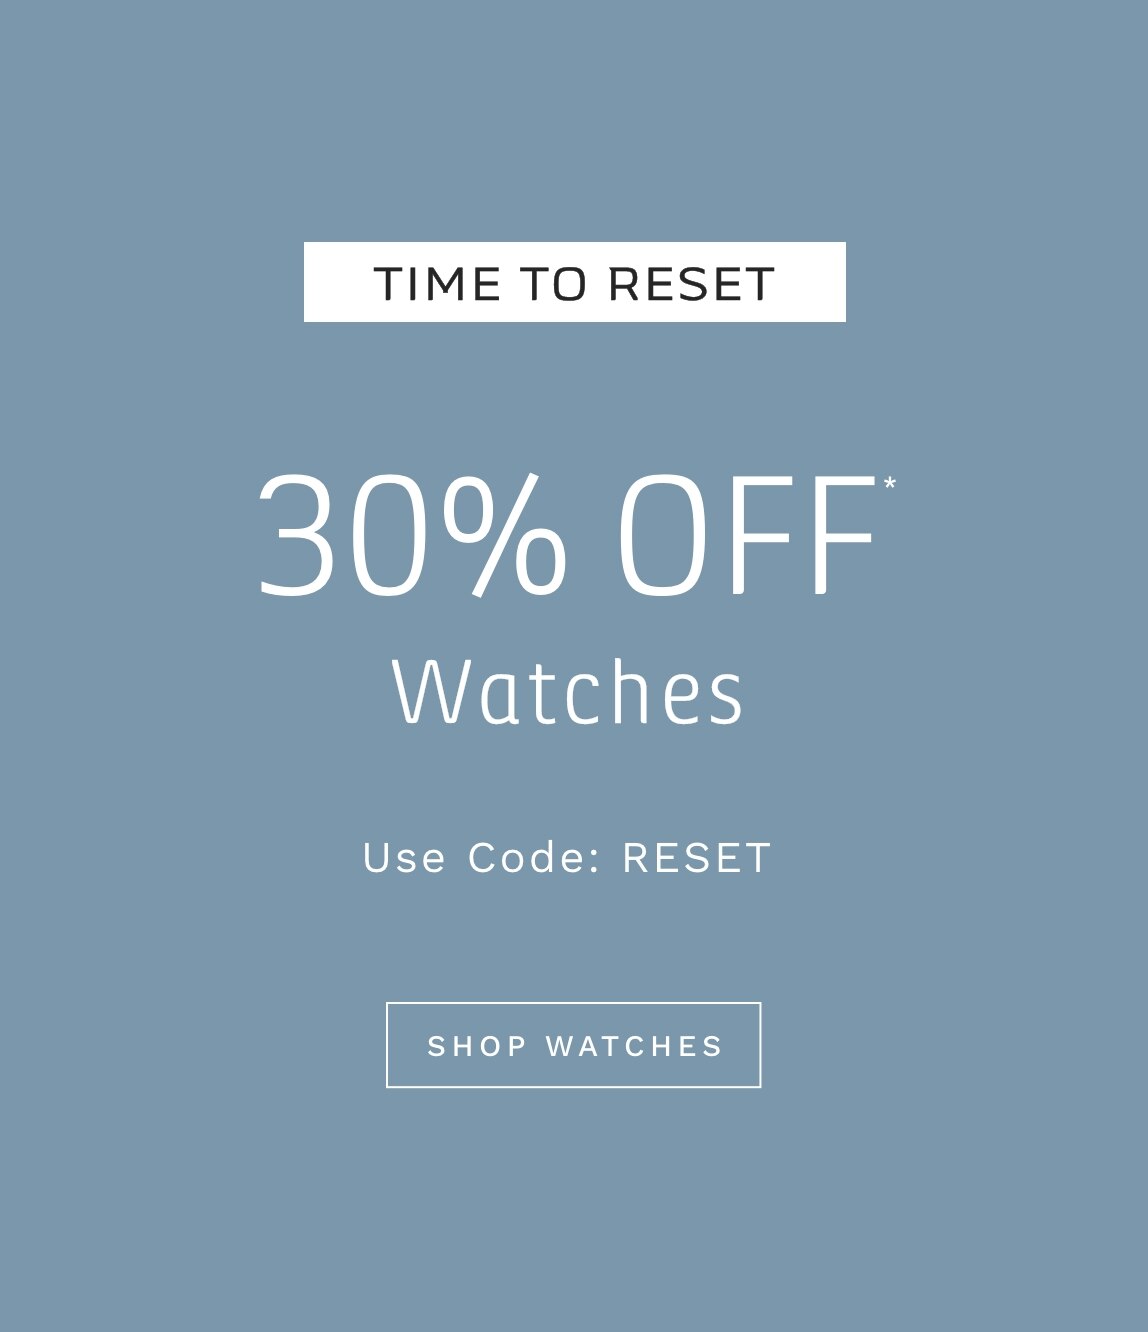 TIME TO RESET 30% OFF* WATCHES Use Code: RESET SHOP WATCHES